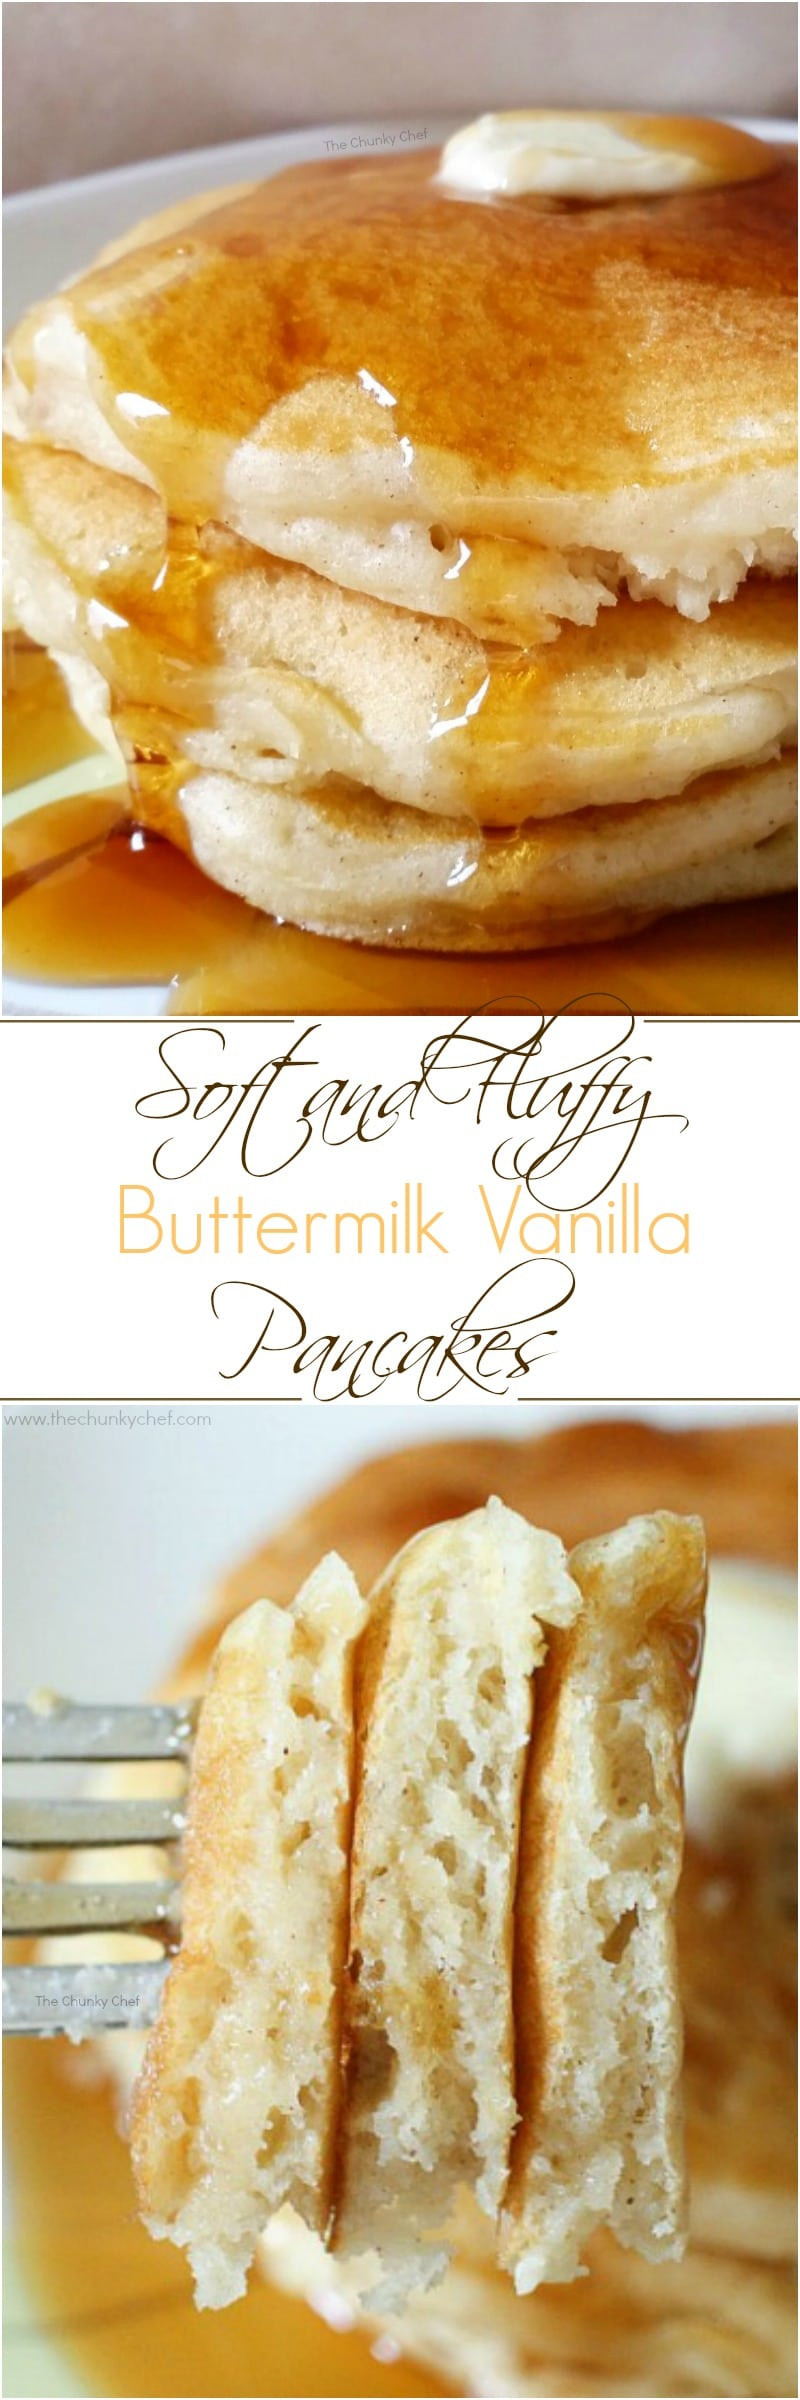 Buttermilk Pancakes From Scratch
 Vanilla Cinnamon Buttermilk Pancakes The Chunky Chef